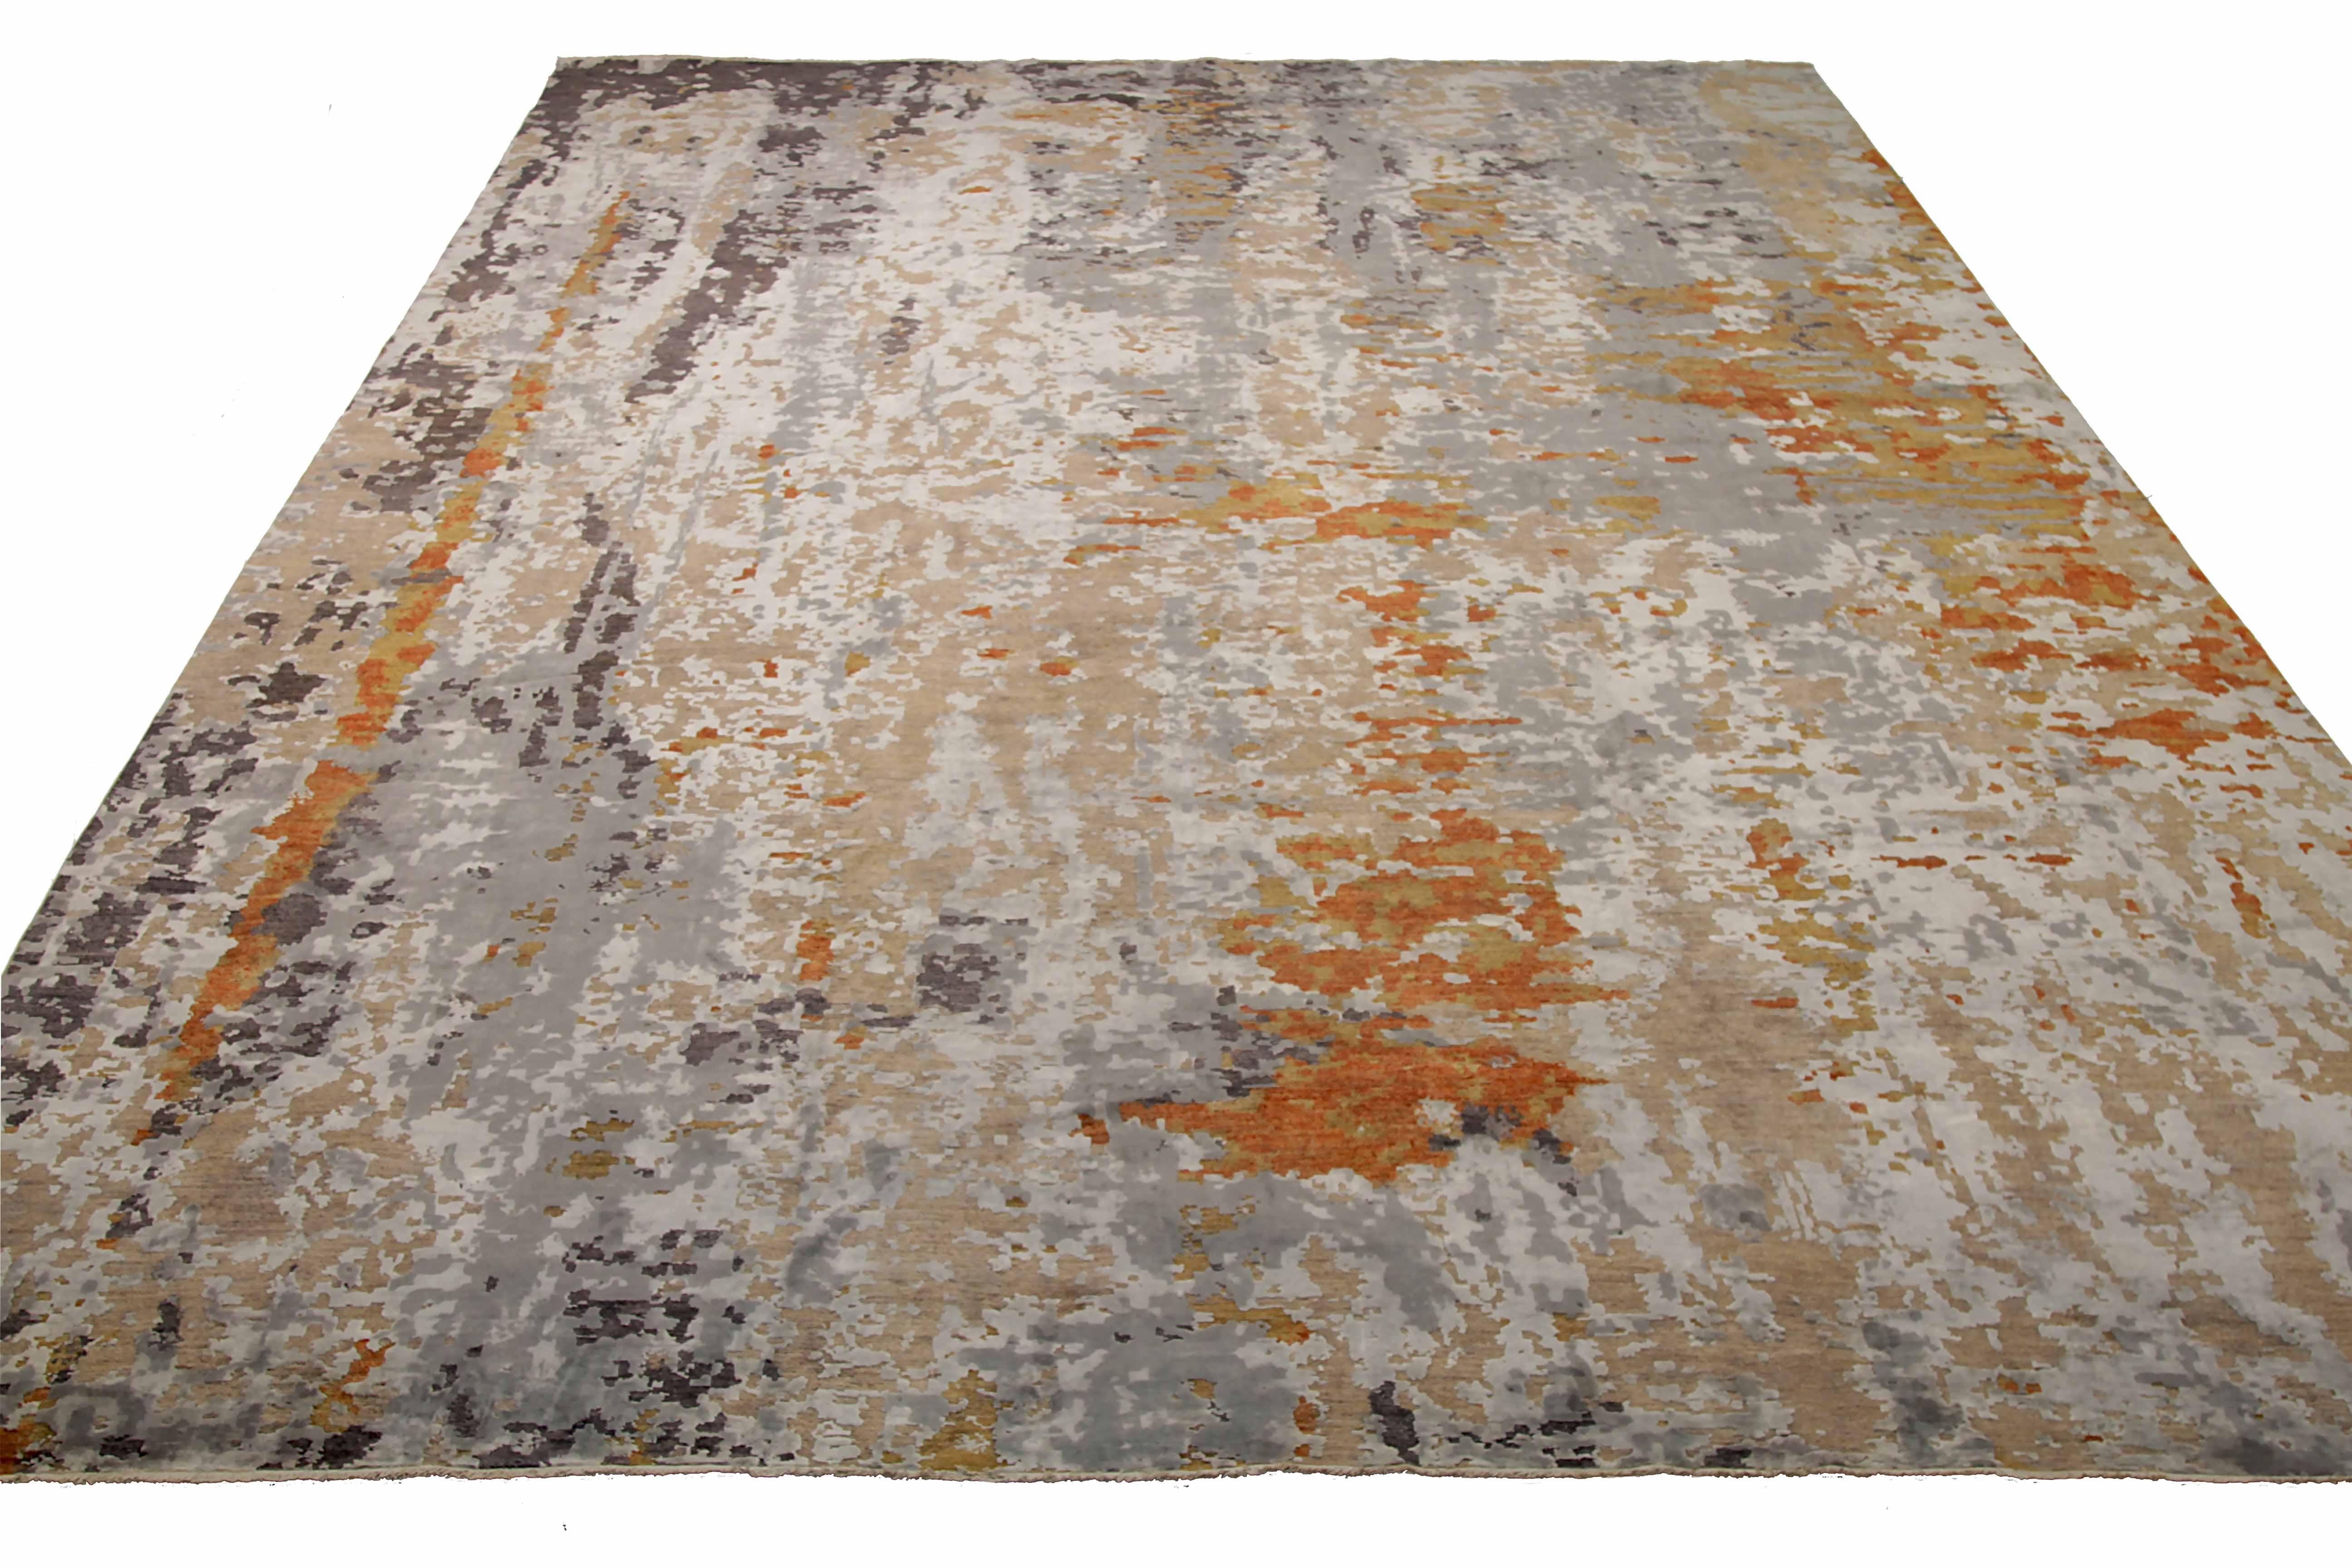 New area rug handwoven from the finest sheep’s wool. It’s colored with all-natural vegetable dyes that are safe for humans and pets. It’s a modern design handwoven by expert artisans. It’s a lovely area rug that can be incorporated with virtually